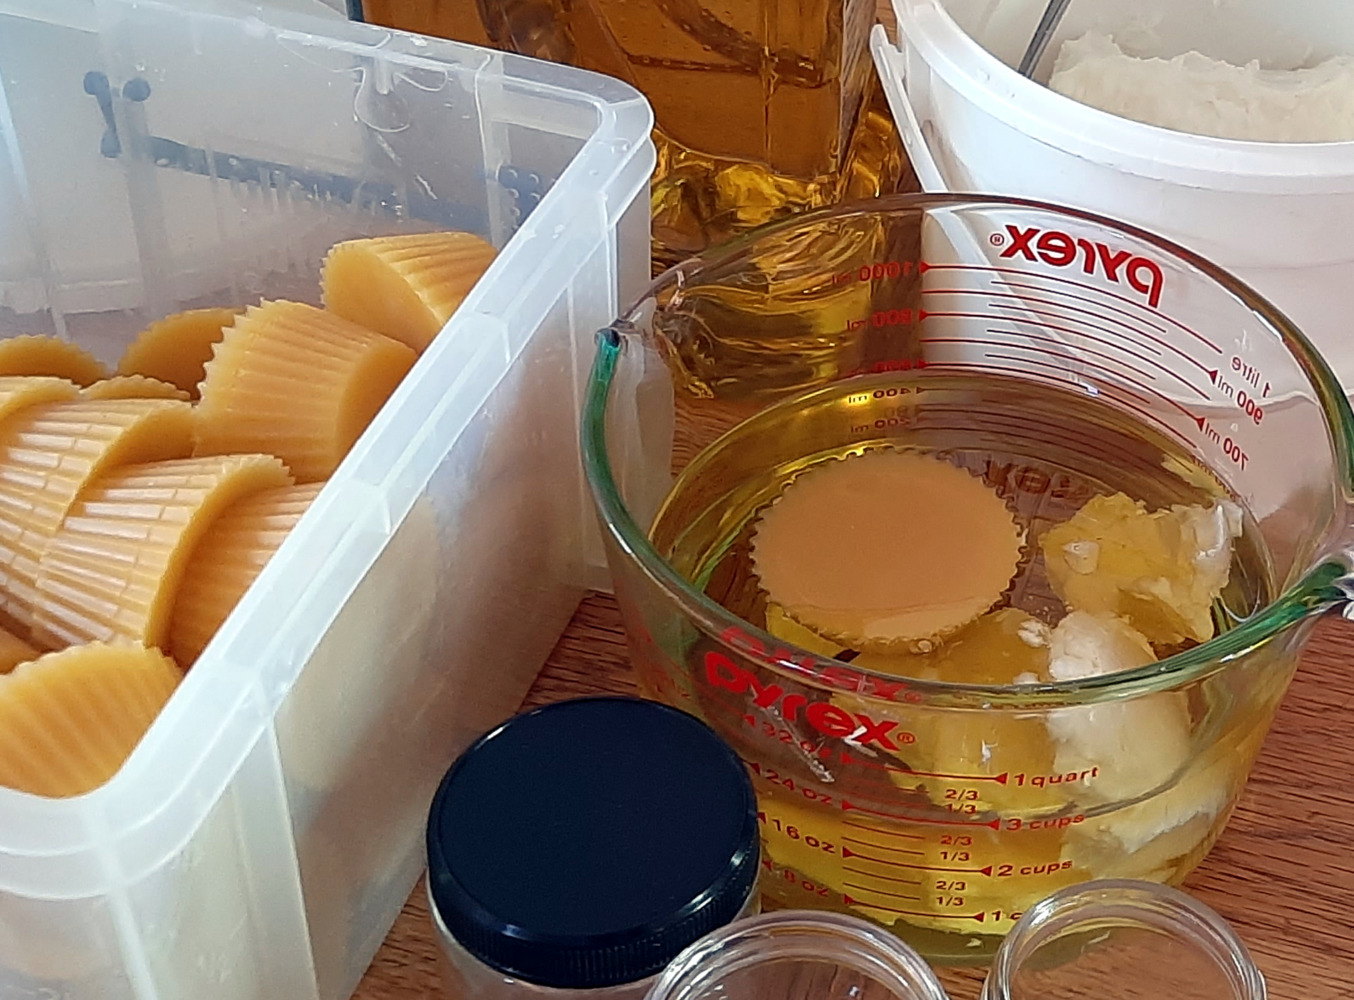 Three salve jars, all empty, sit next to a plastic bin filled with cupcake-shaped hunks of beeswax. A big glass mixing bowl holds another chunk of beeswax, along with olive oil and three lumps of white shea butter.